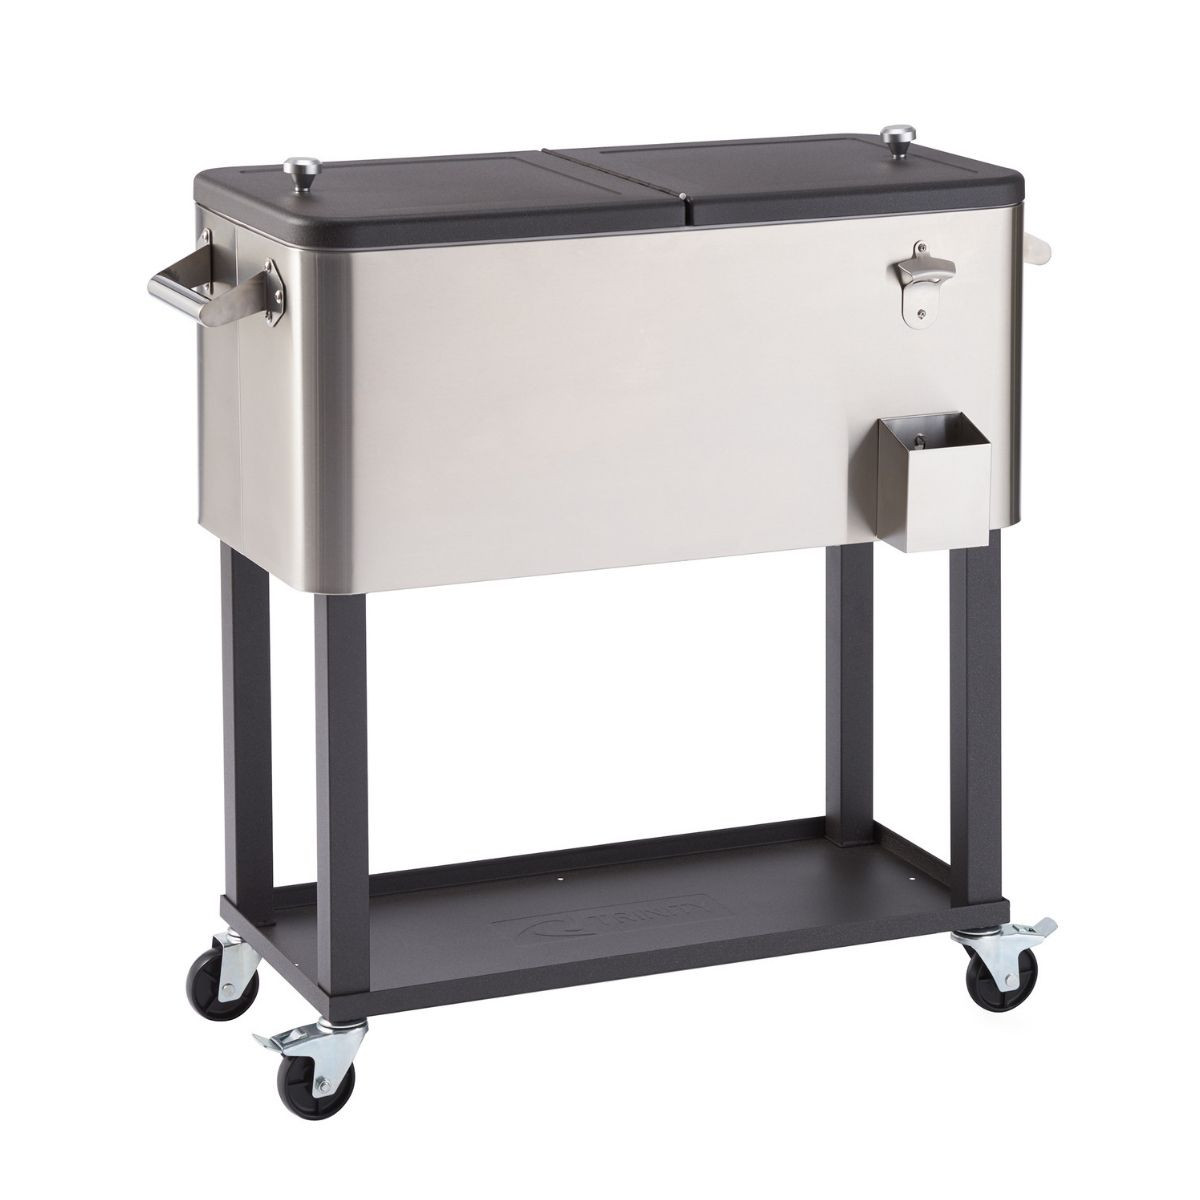 Txk-0806 80 Qt. Stainless Steel Cooler With Cover - 35.75 X 36 X 18.5 In.